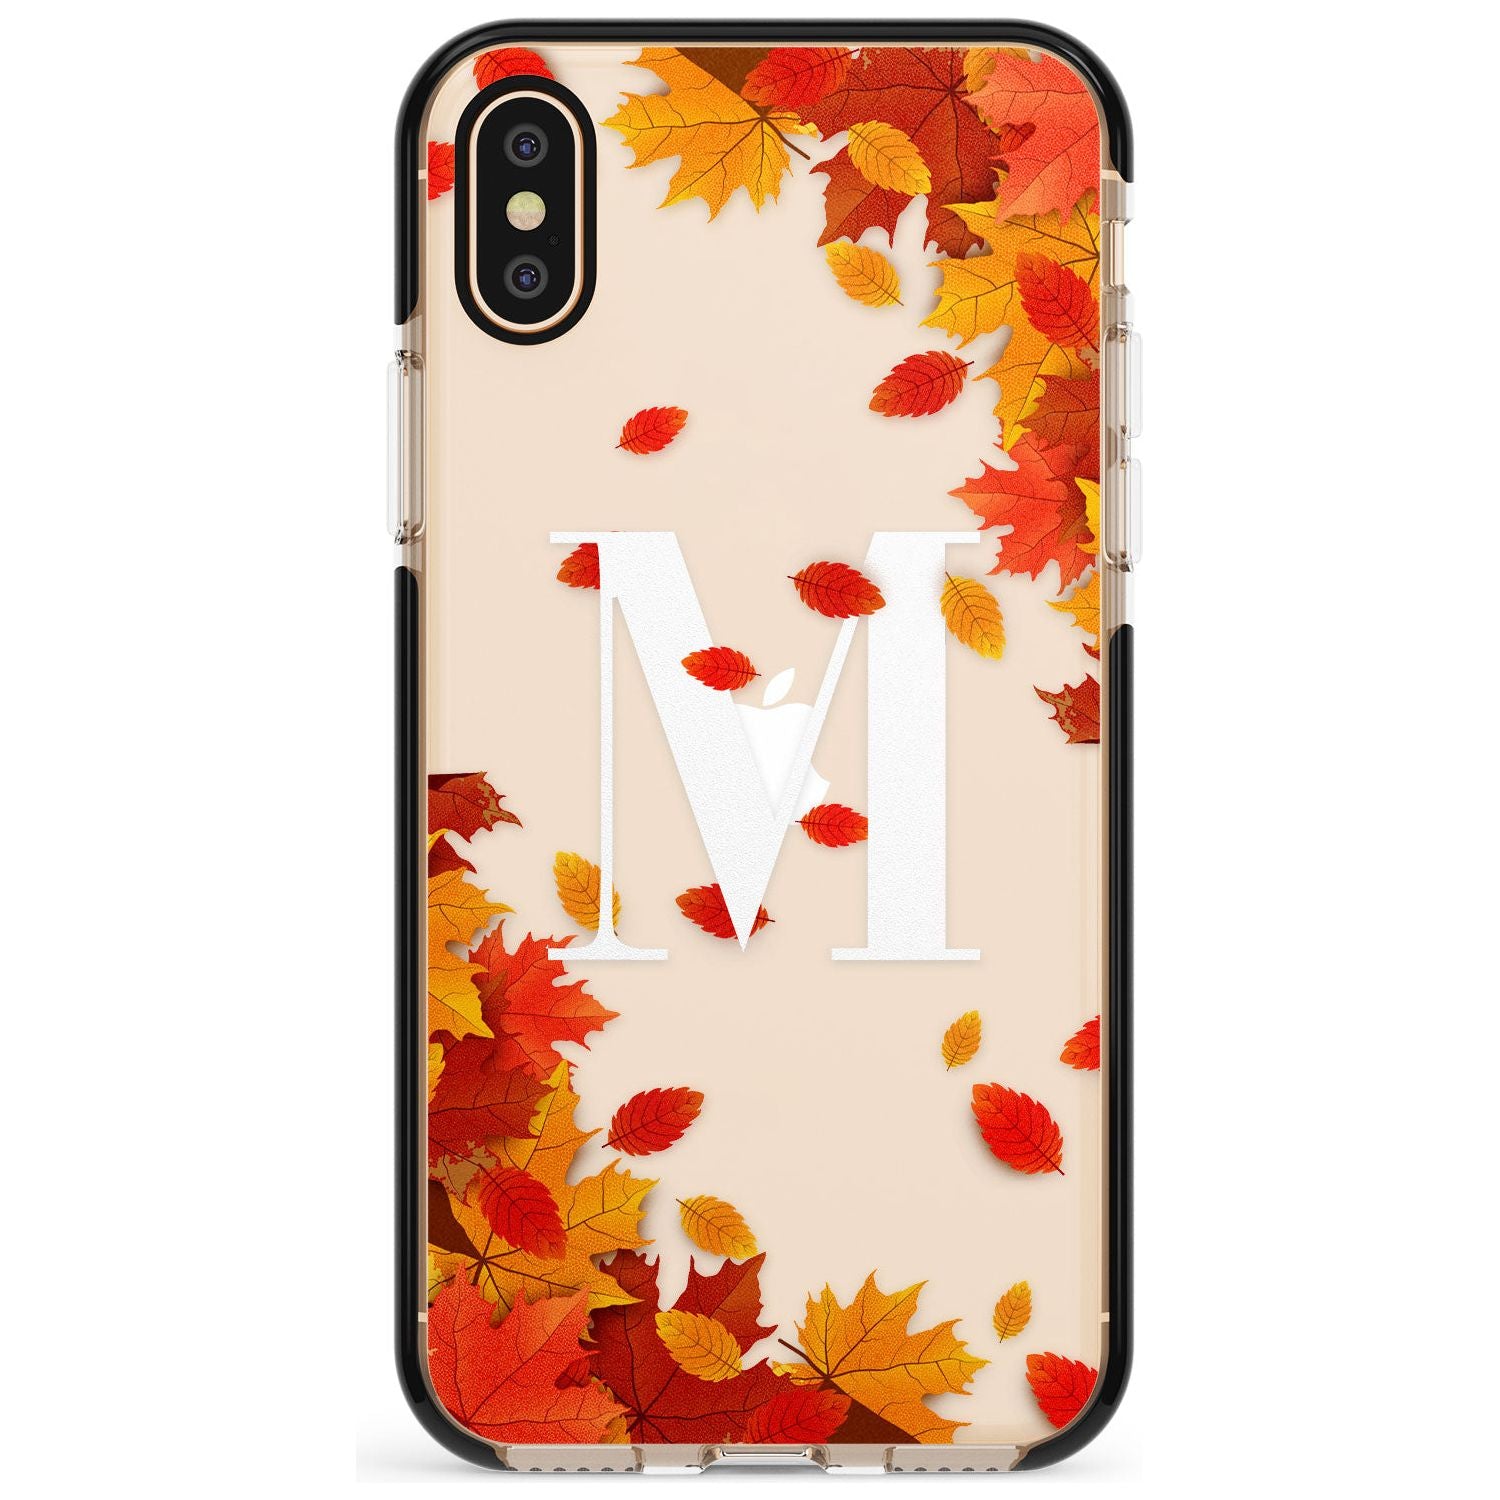 Personalised Monogram Autumn Leaves Black Impact Phone Case for iPhone X XS Max XR